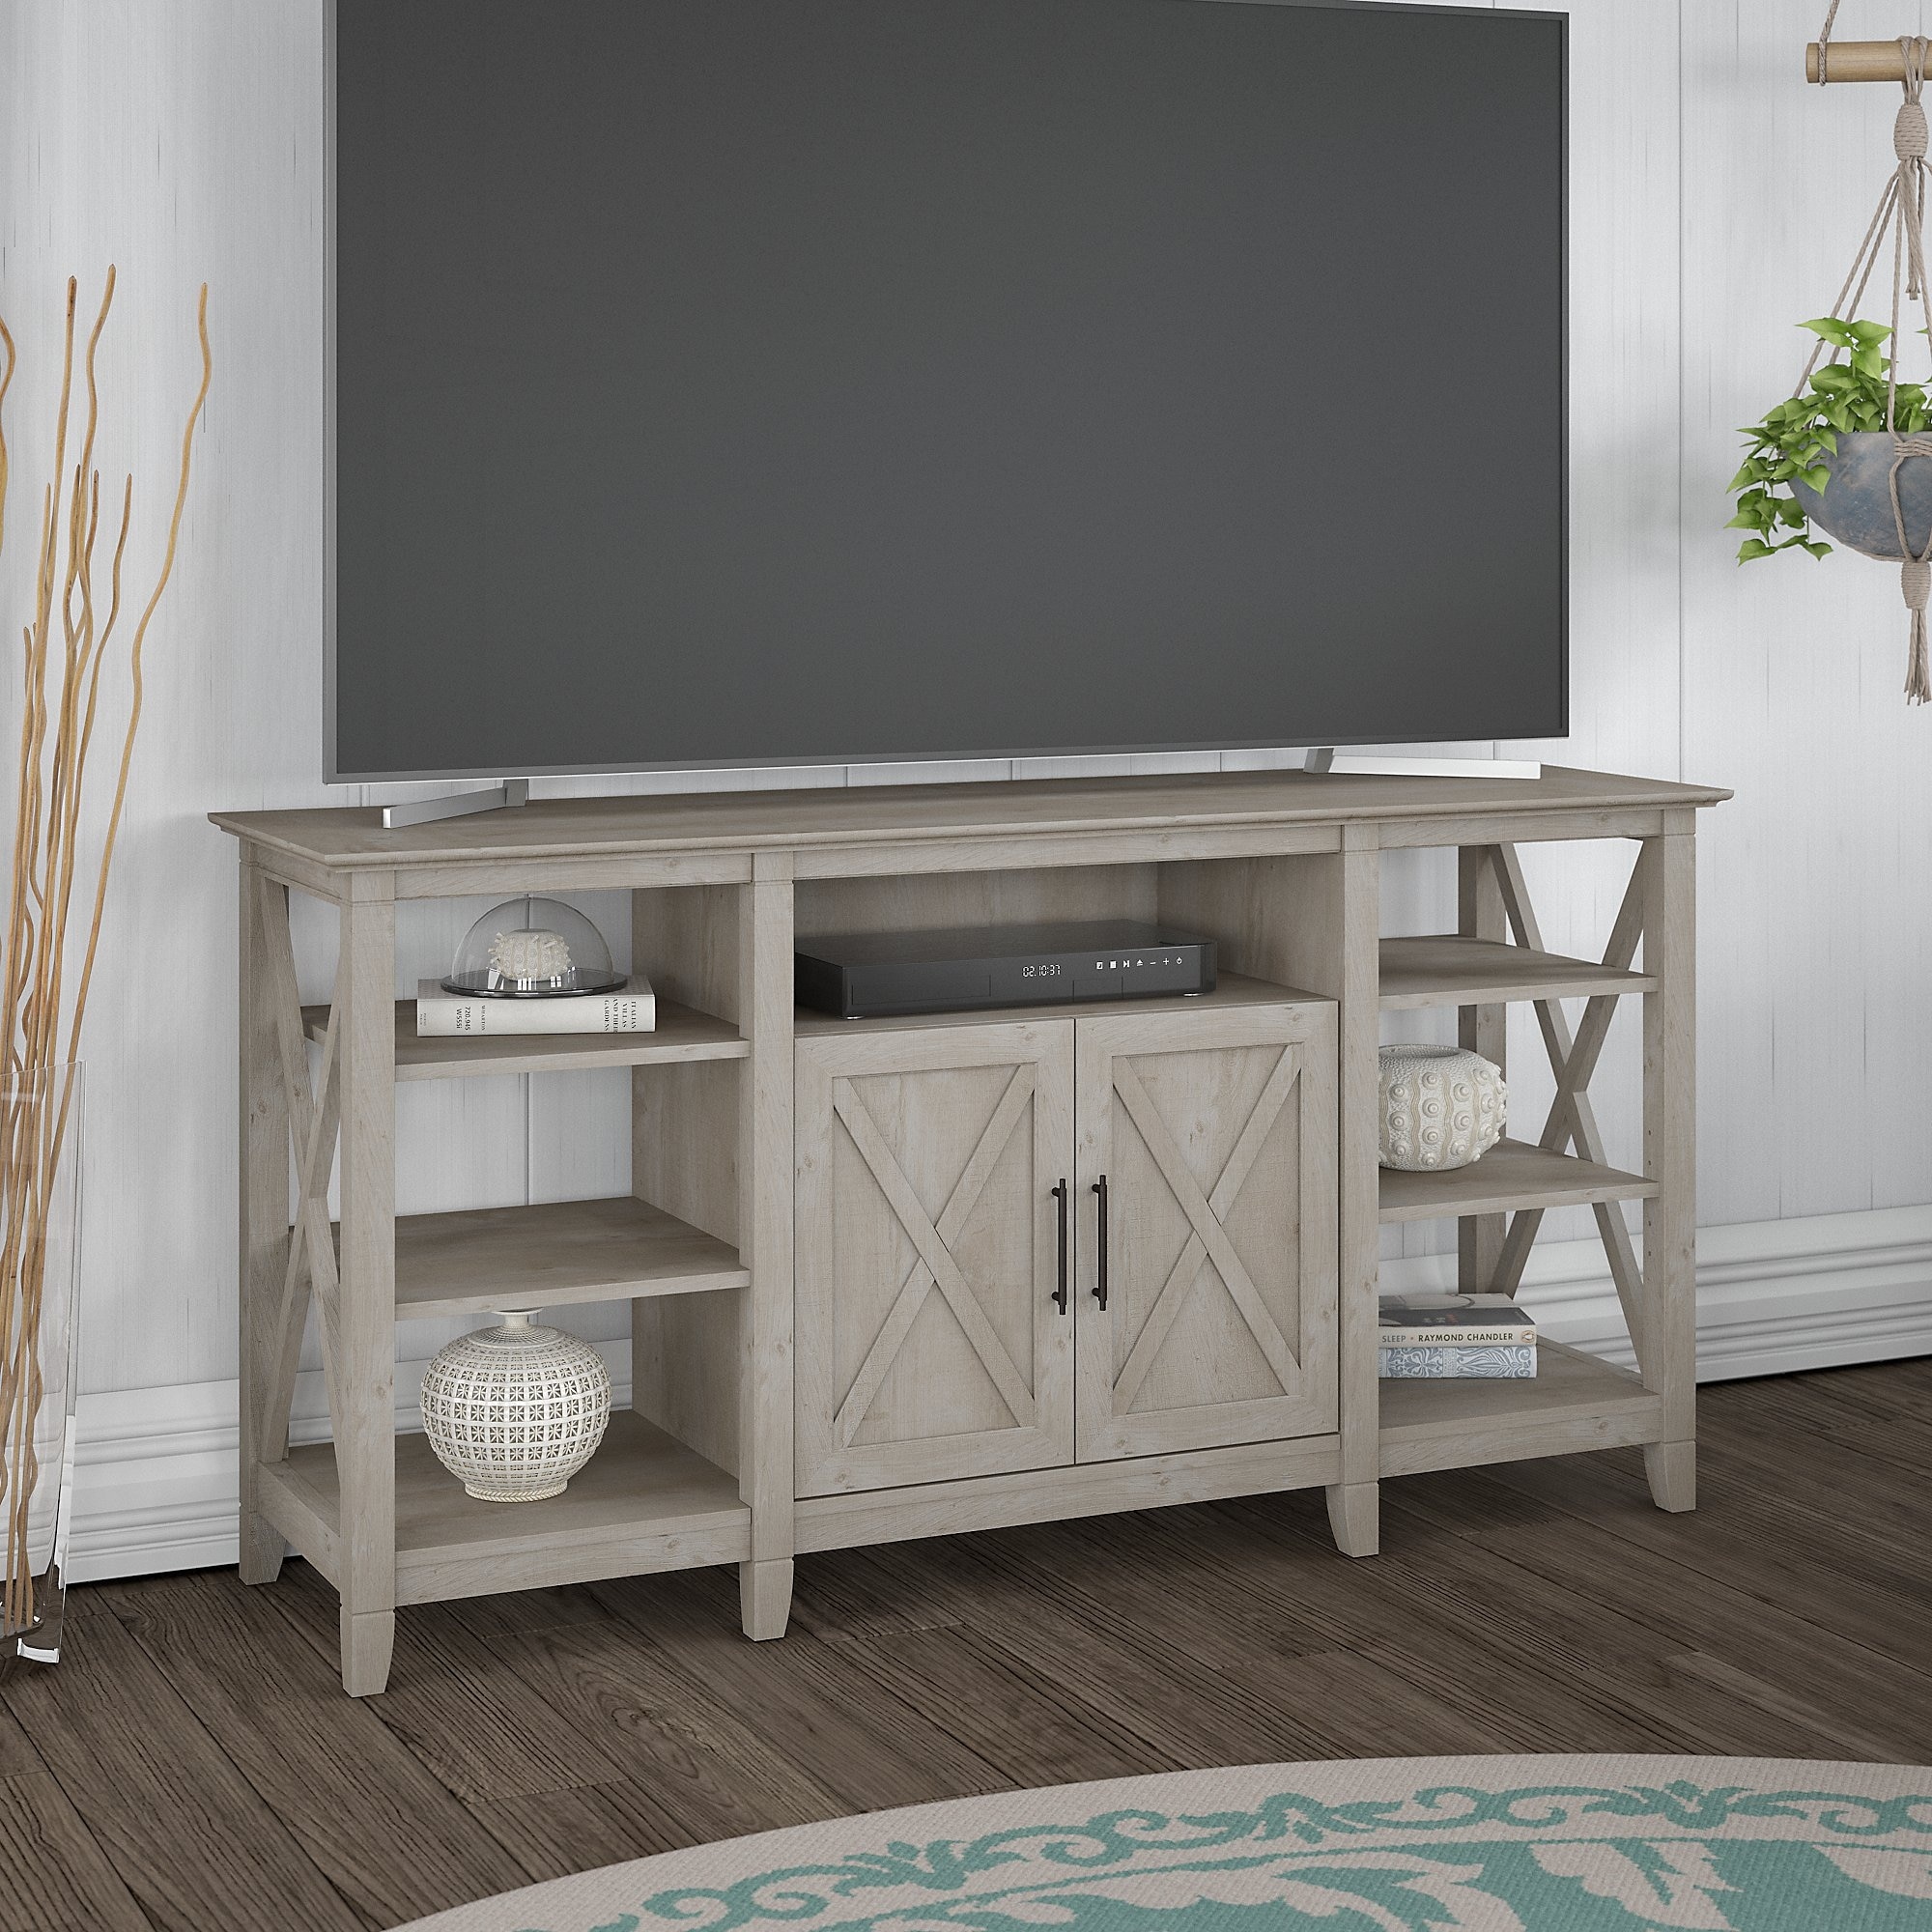 Tall Tv Stand - Bed Bath & Beyond - 30068576